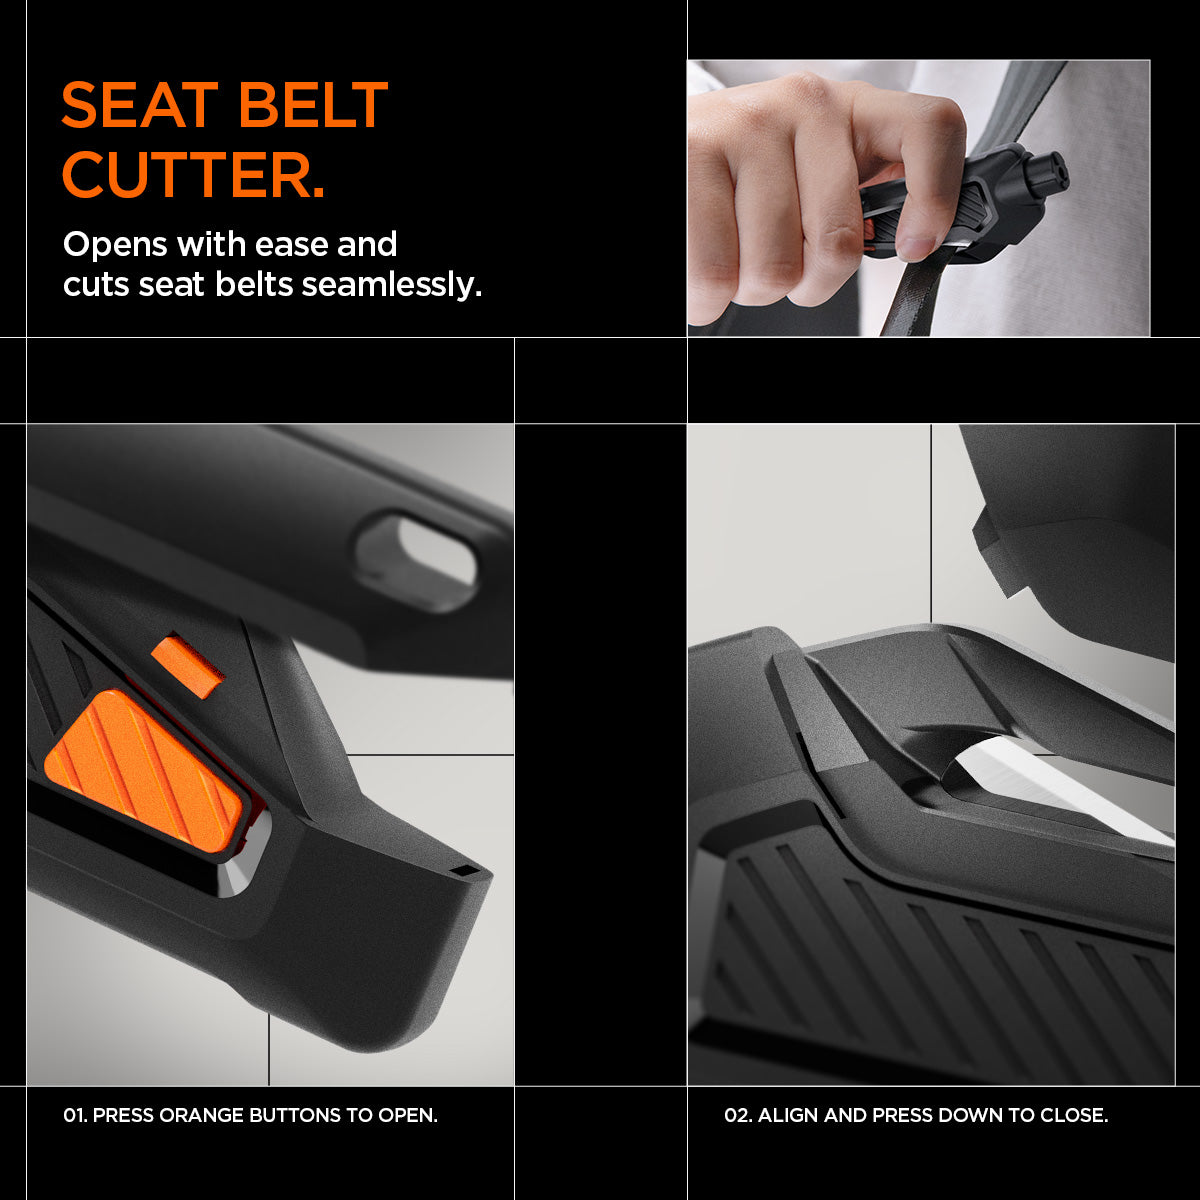 ACP06988 - Car Escape Tool in Black showing the Seat Belt Cutter. Opens with ease and cuts seat belts seamlessly. Instruction: 1. Press orange buttons to open and 2. Align and press down to close